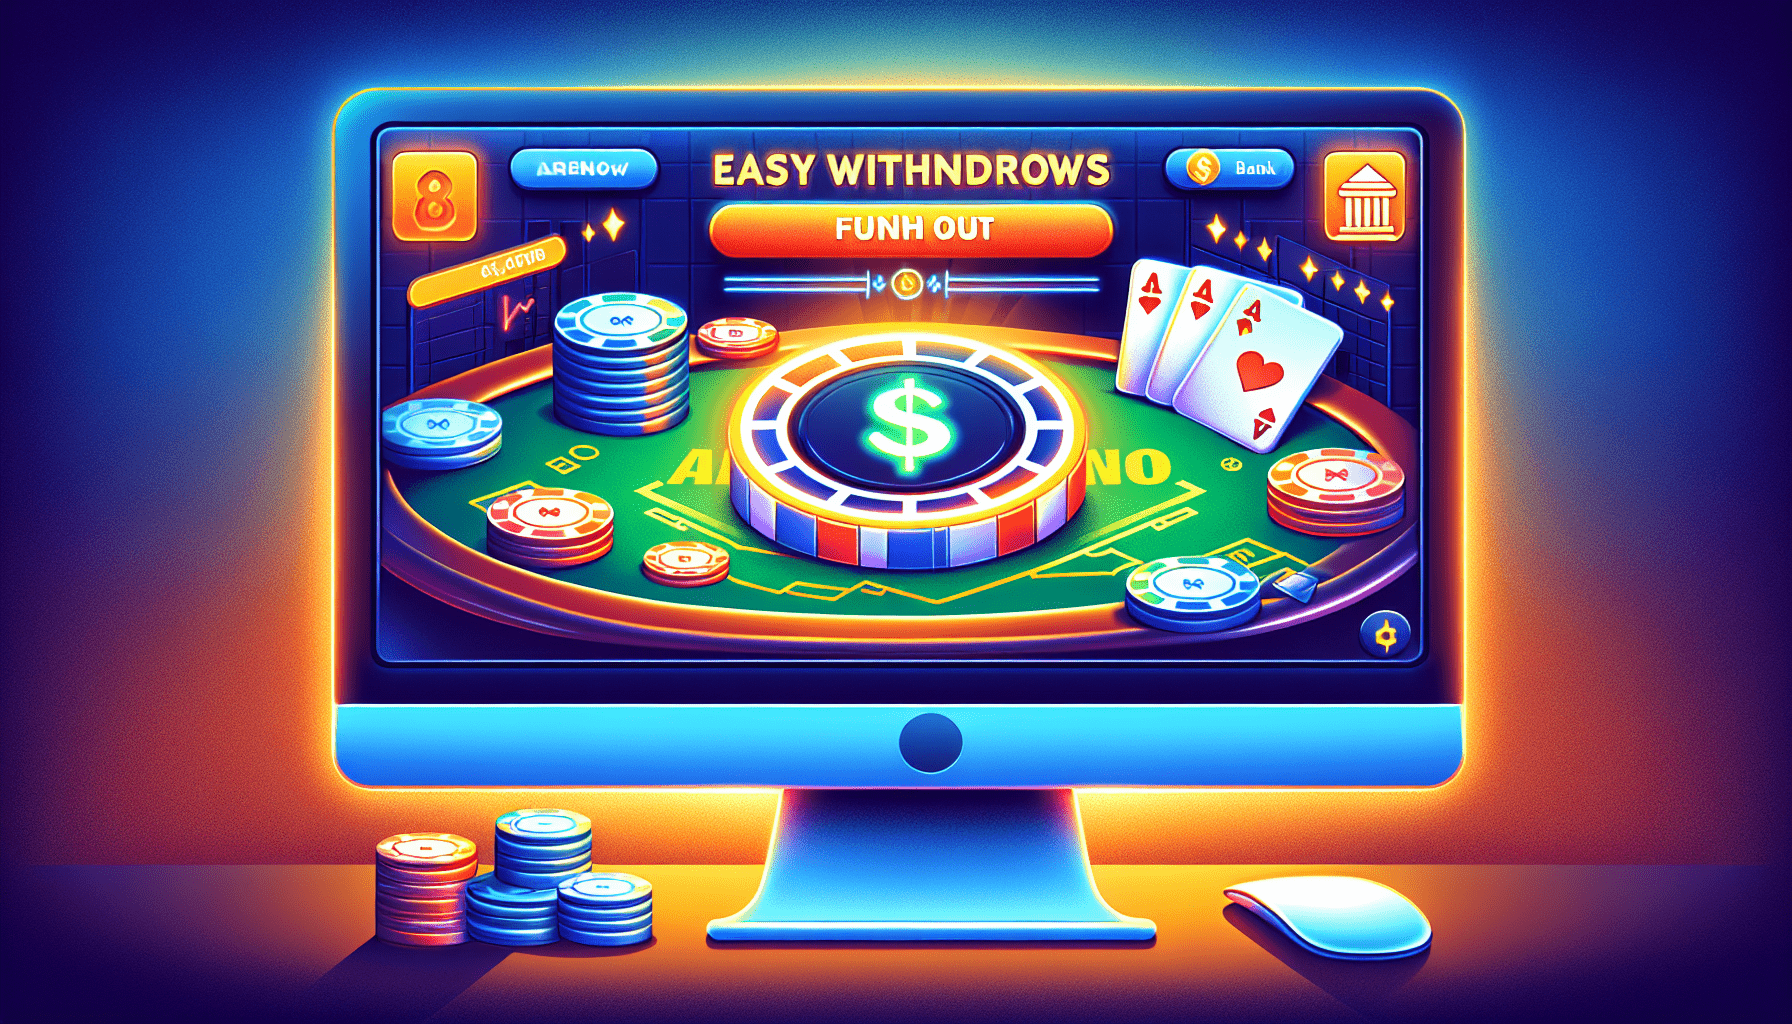 What Is The Easiest Online Casino To Cash Out?